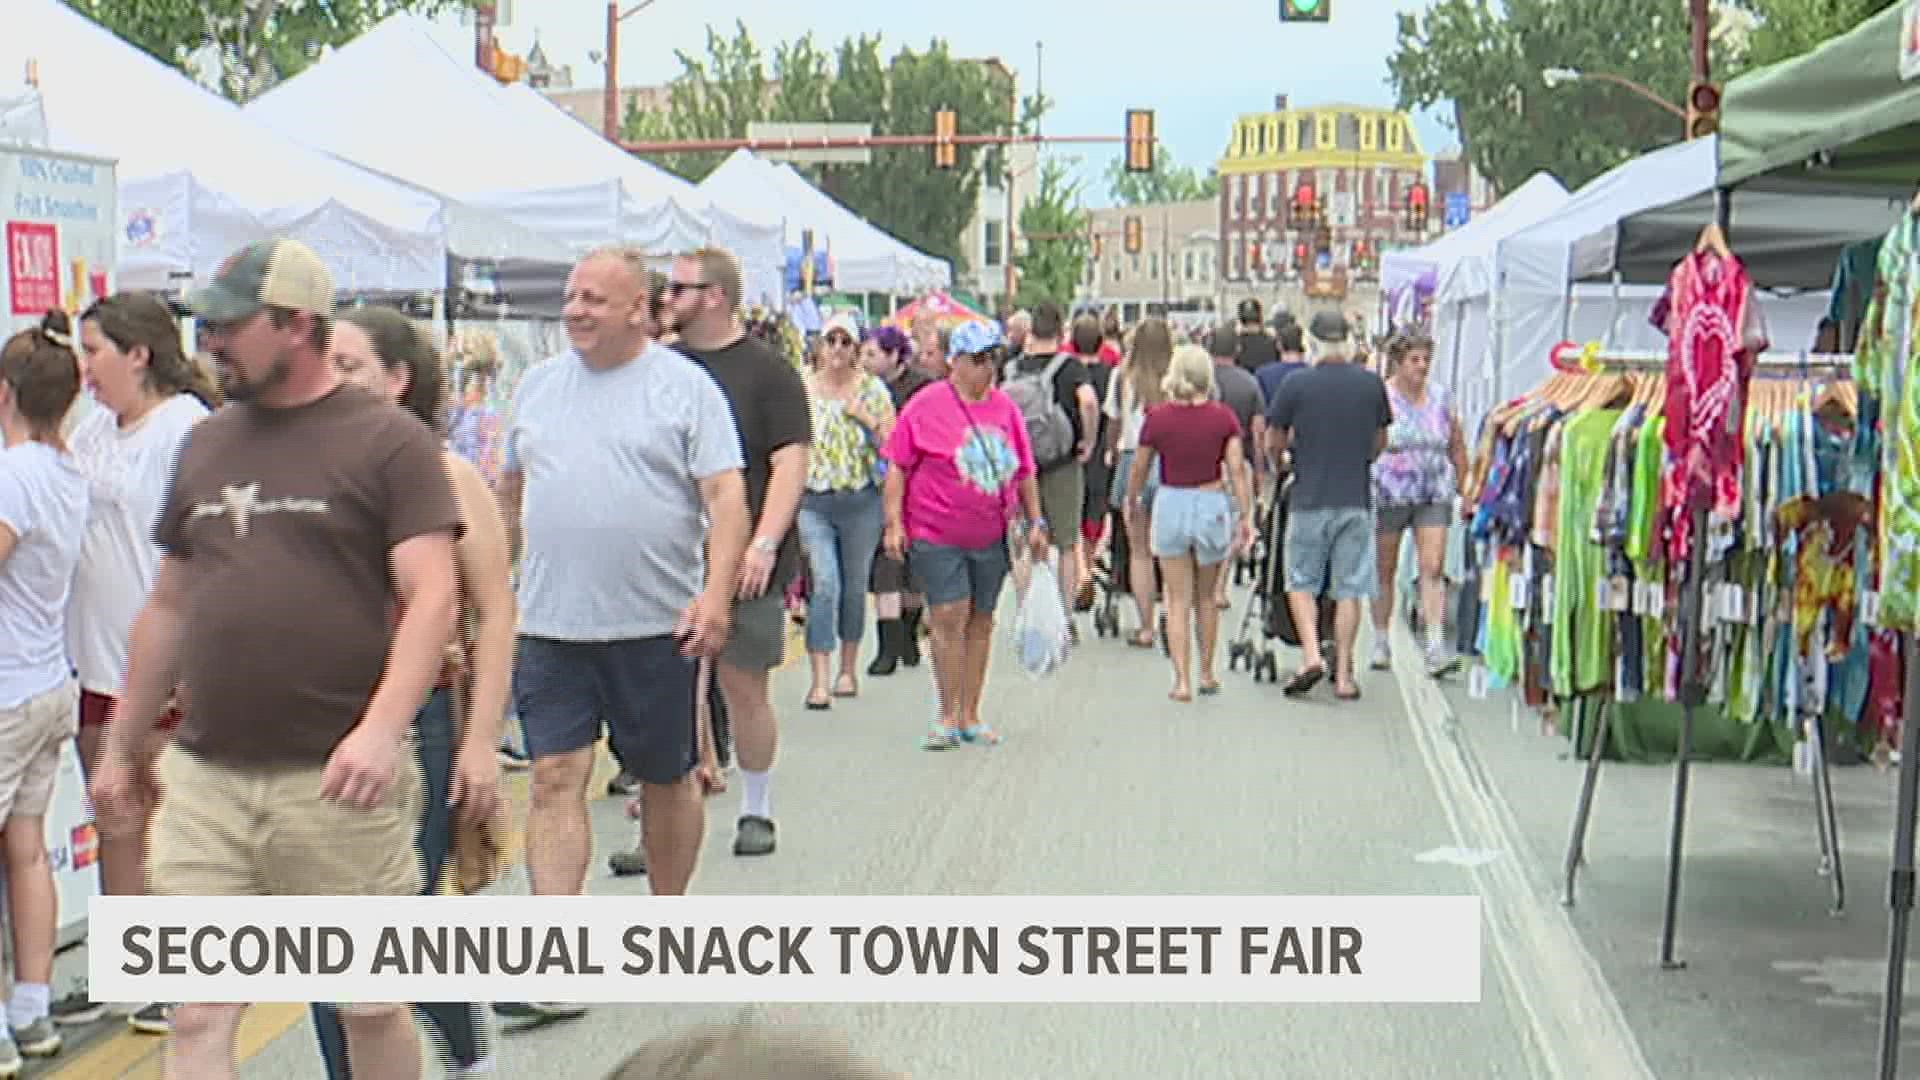 The town hosted their second annual Snack Town Street Fair on Saturday, celebrating the businesses that play a prominent role in their community.